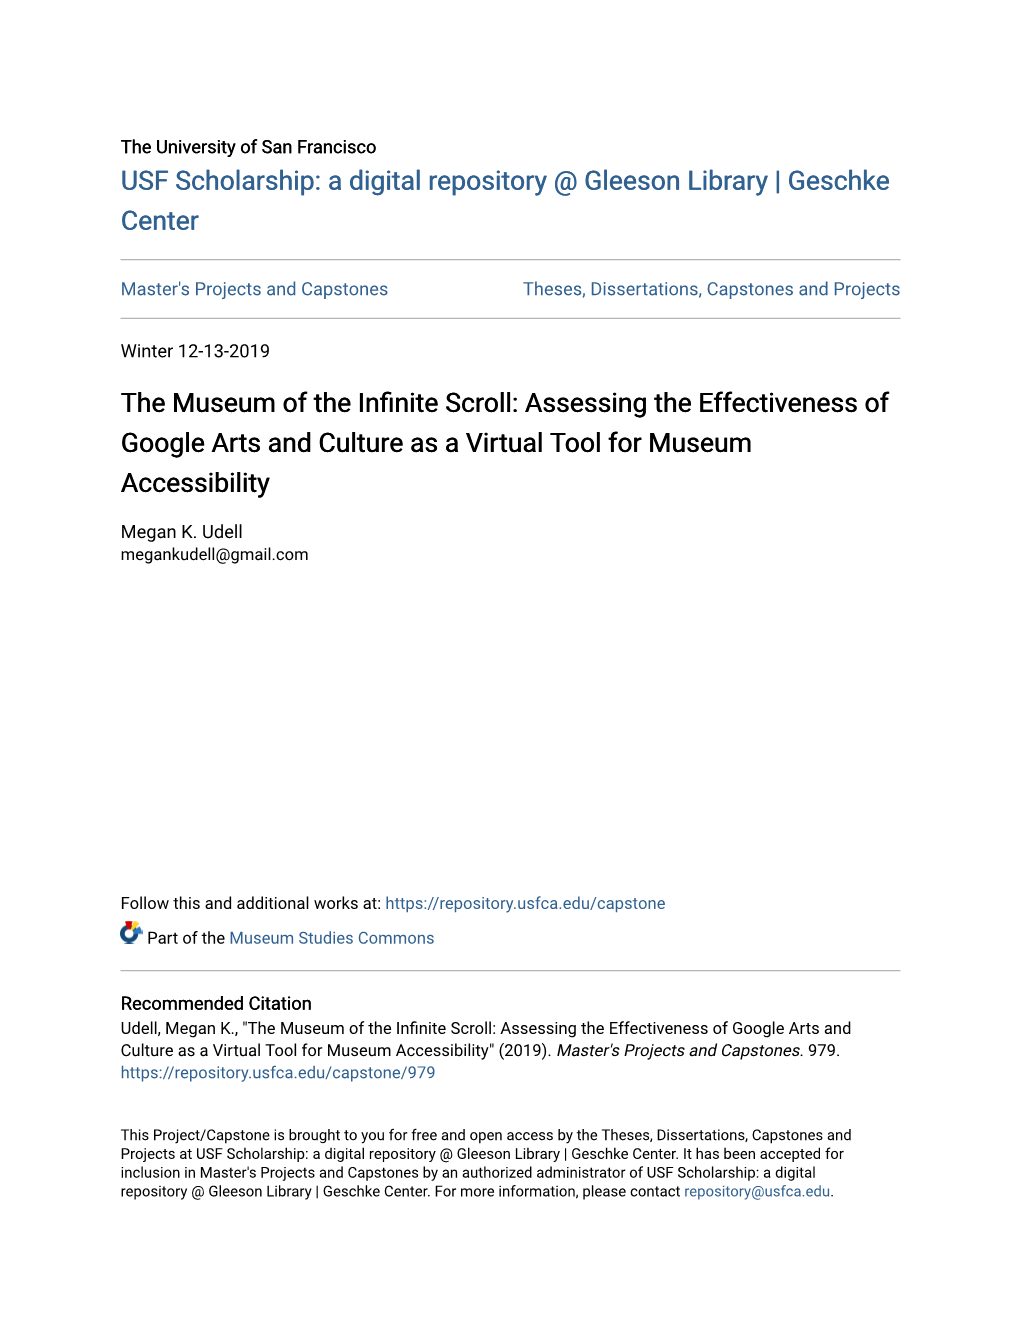 The Museum of the Infinite Scroll: Assessing the Effectiveness of Google Arts and Culture As a Virtual Tool for Museum Accessibility